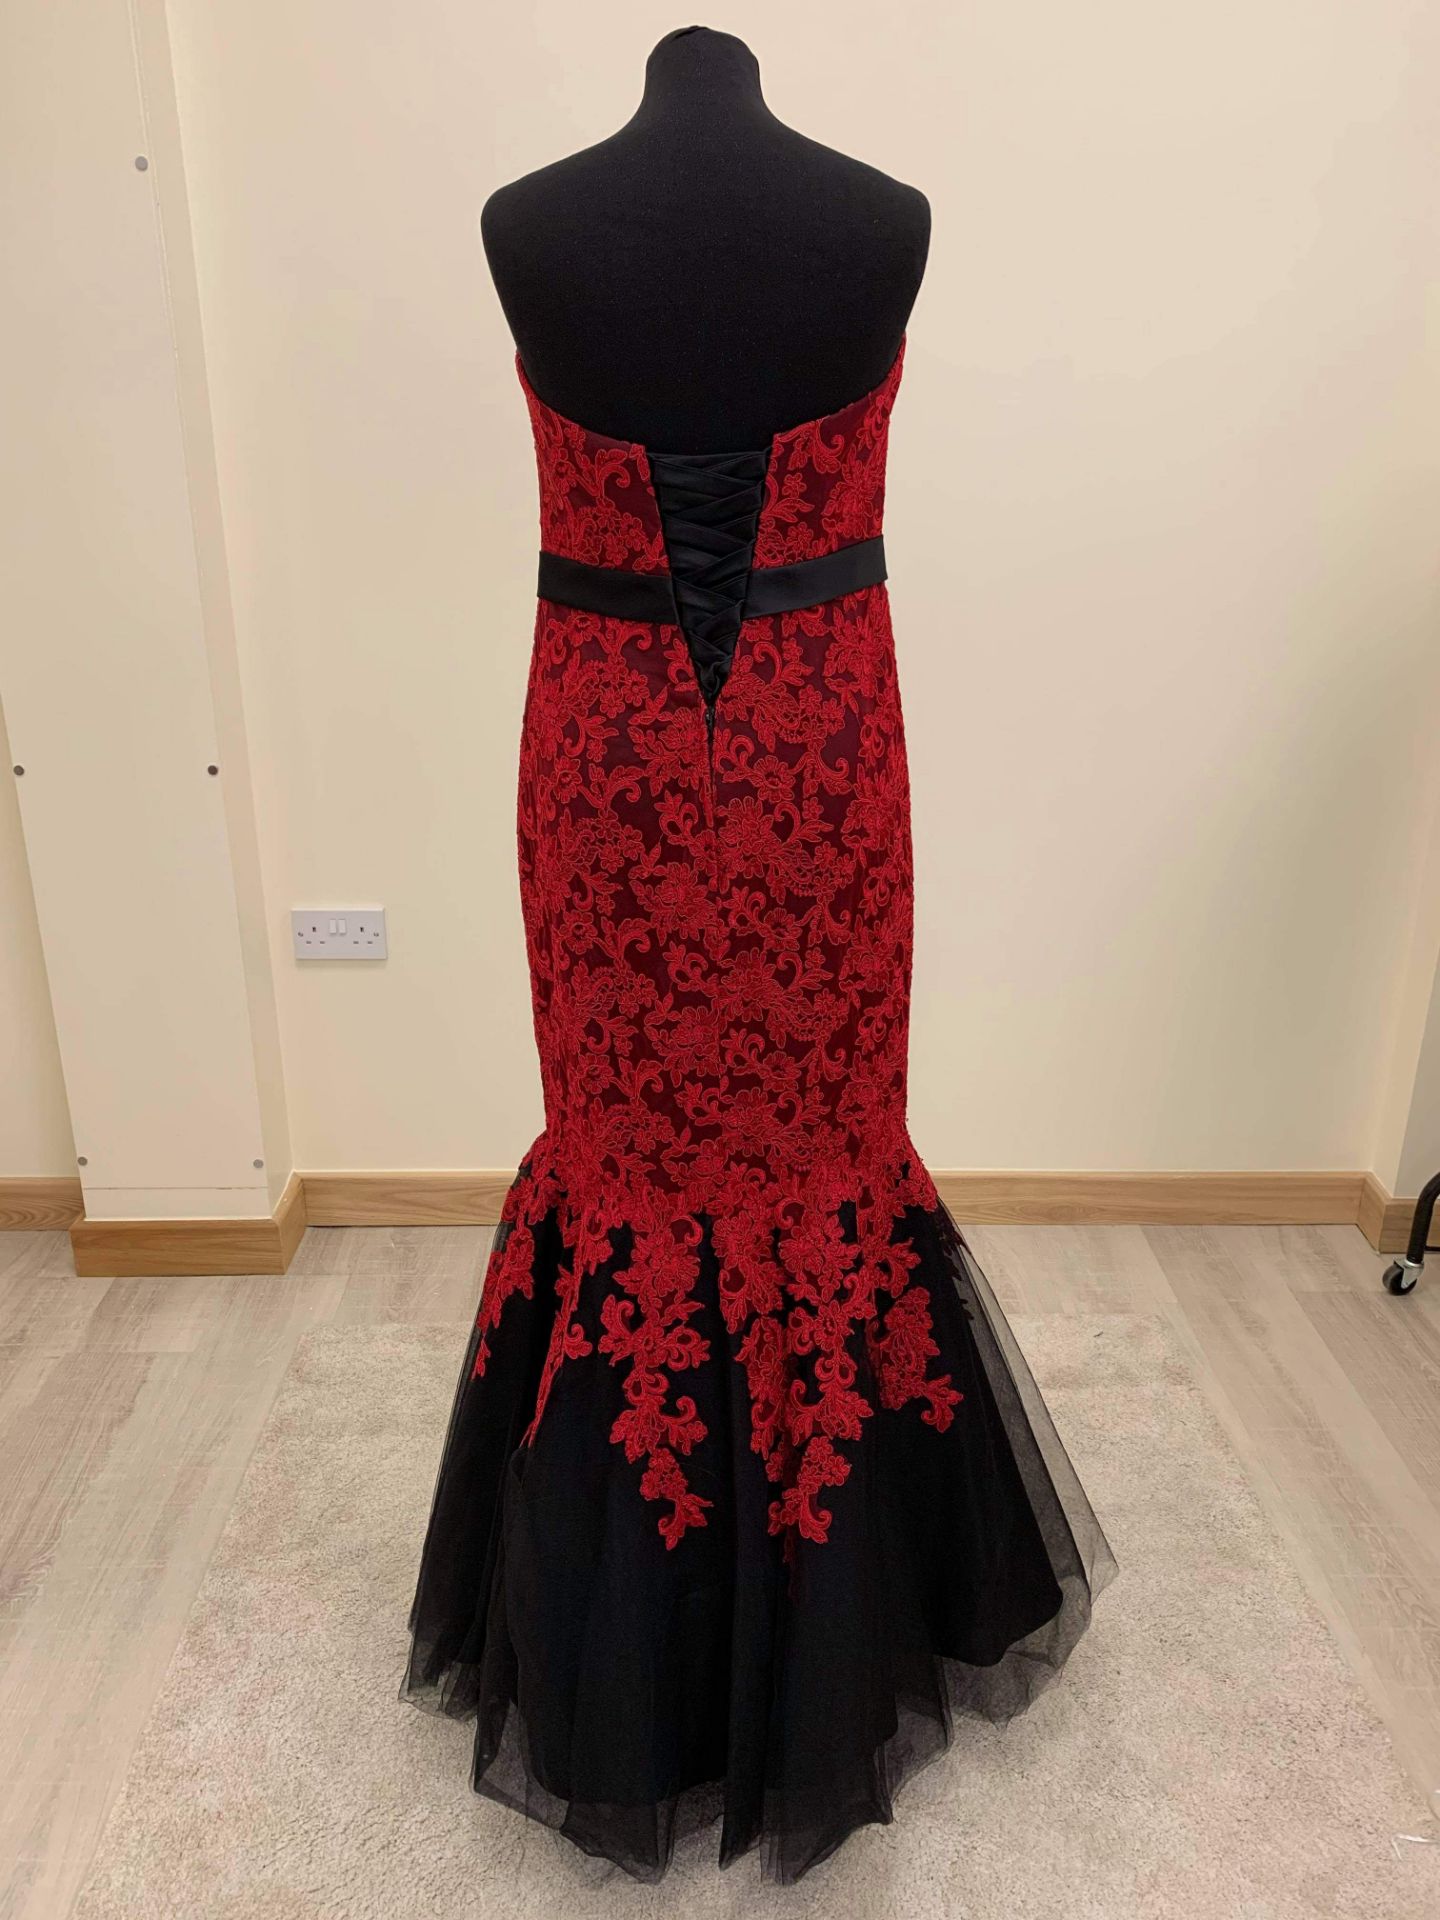 Red and Black Venus Wedding Dress RRP £895 Size 12 - Image 4 of 5